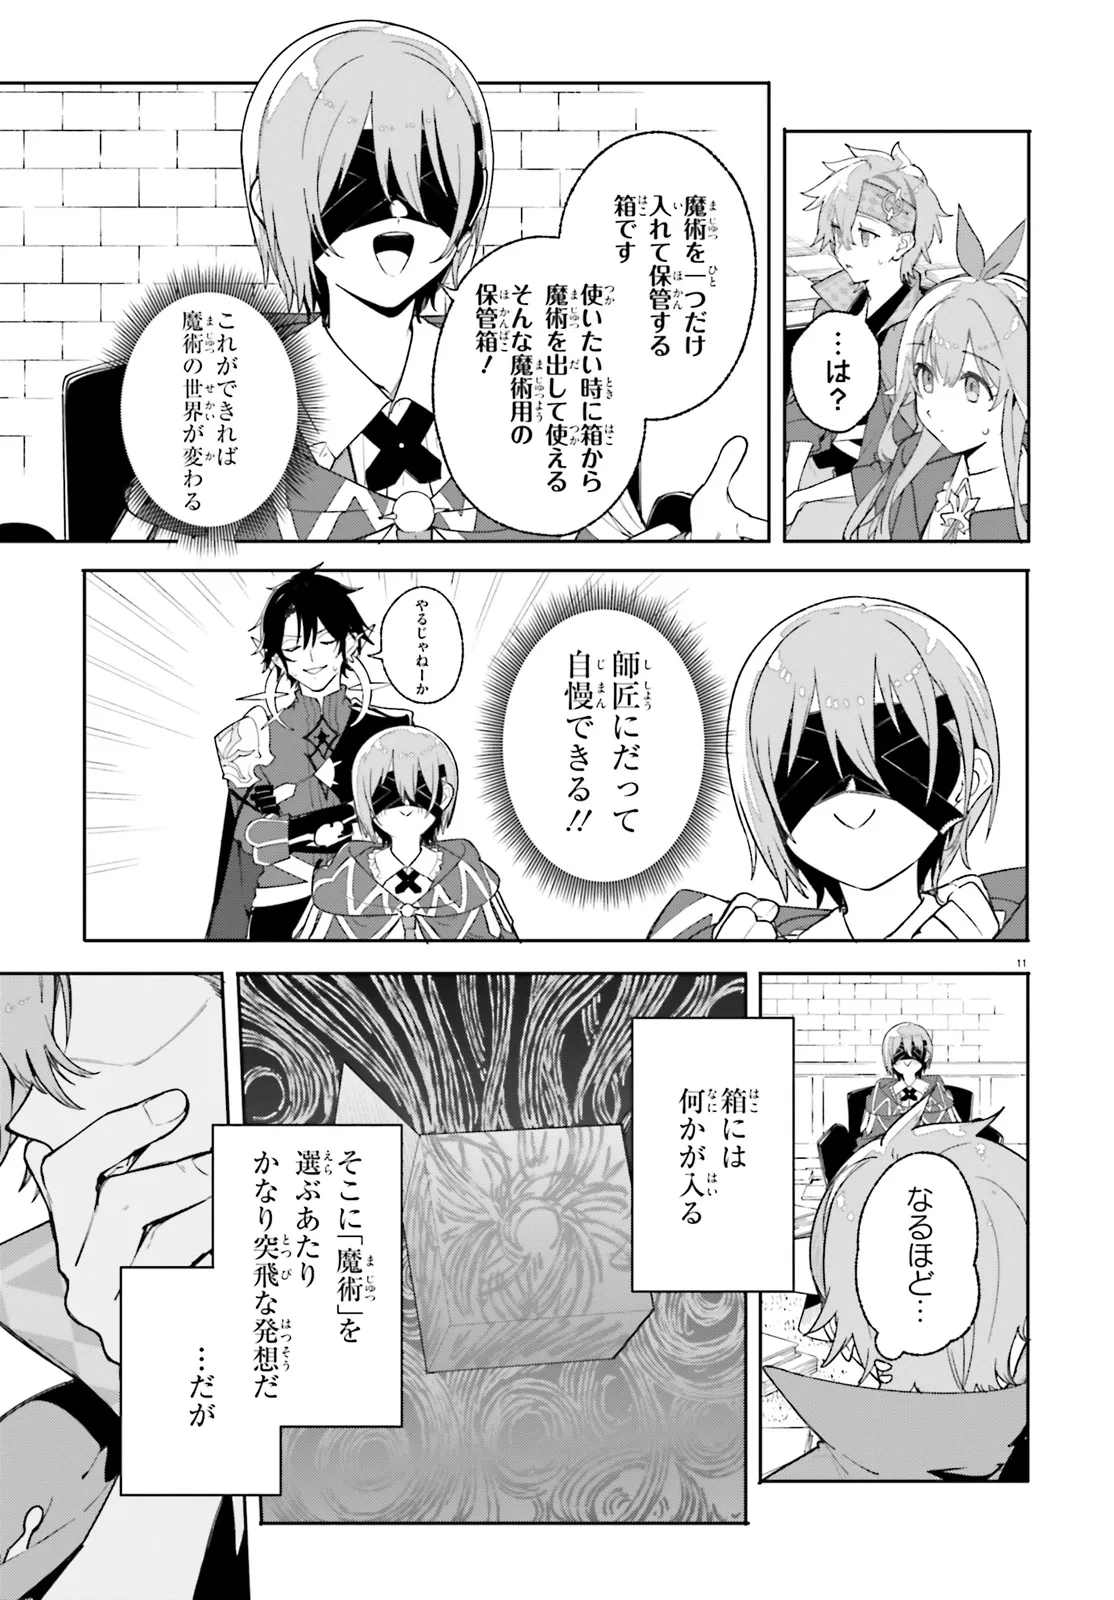 Kunon the Sorcerer Can See Kunon the Sorcerer Can See Through 魔術師クノンは見えている 第26.2話 - Page 1